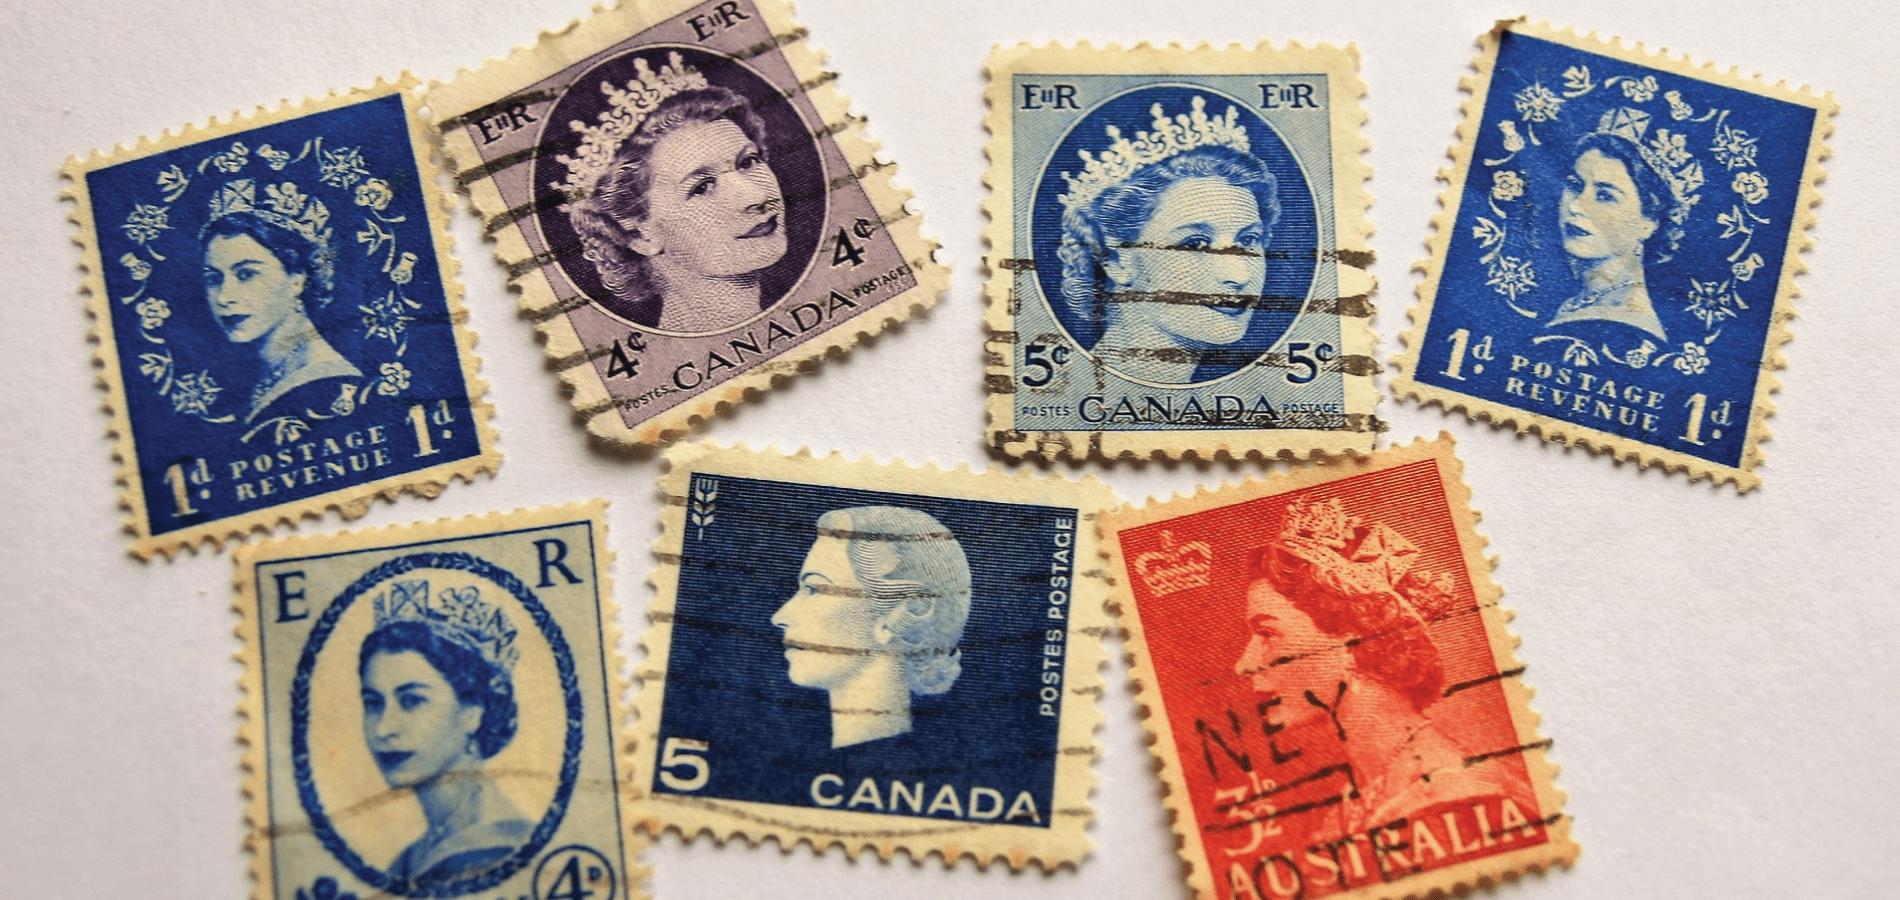 Stamps featuring the Queen